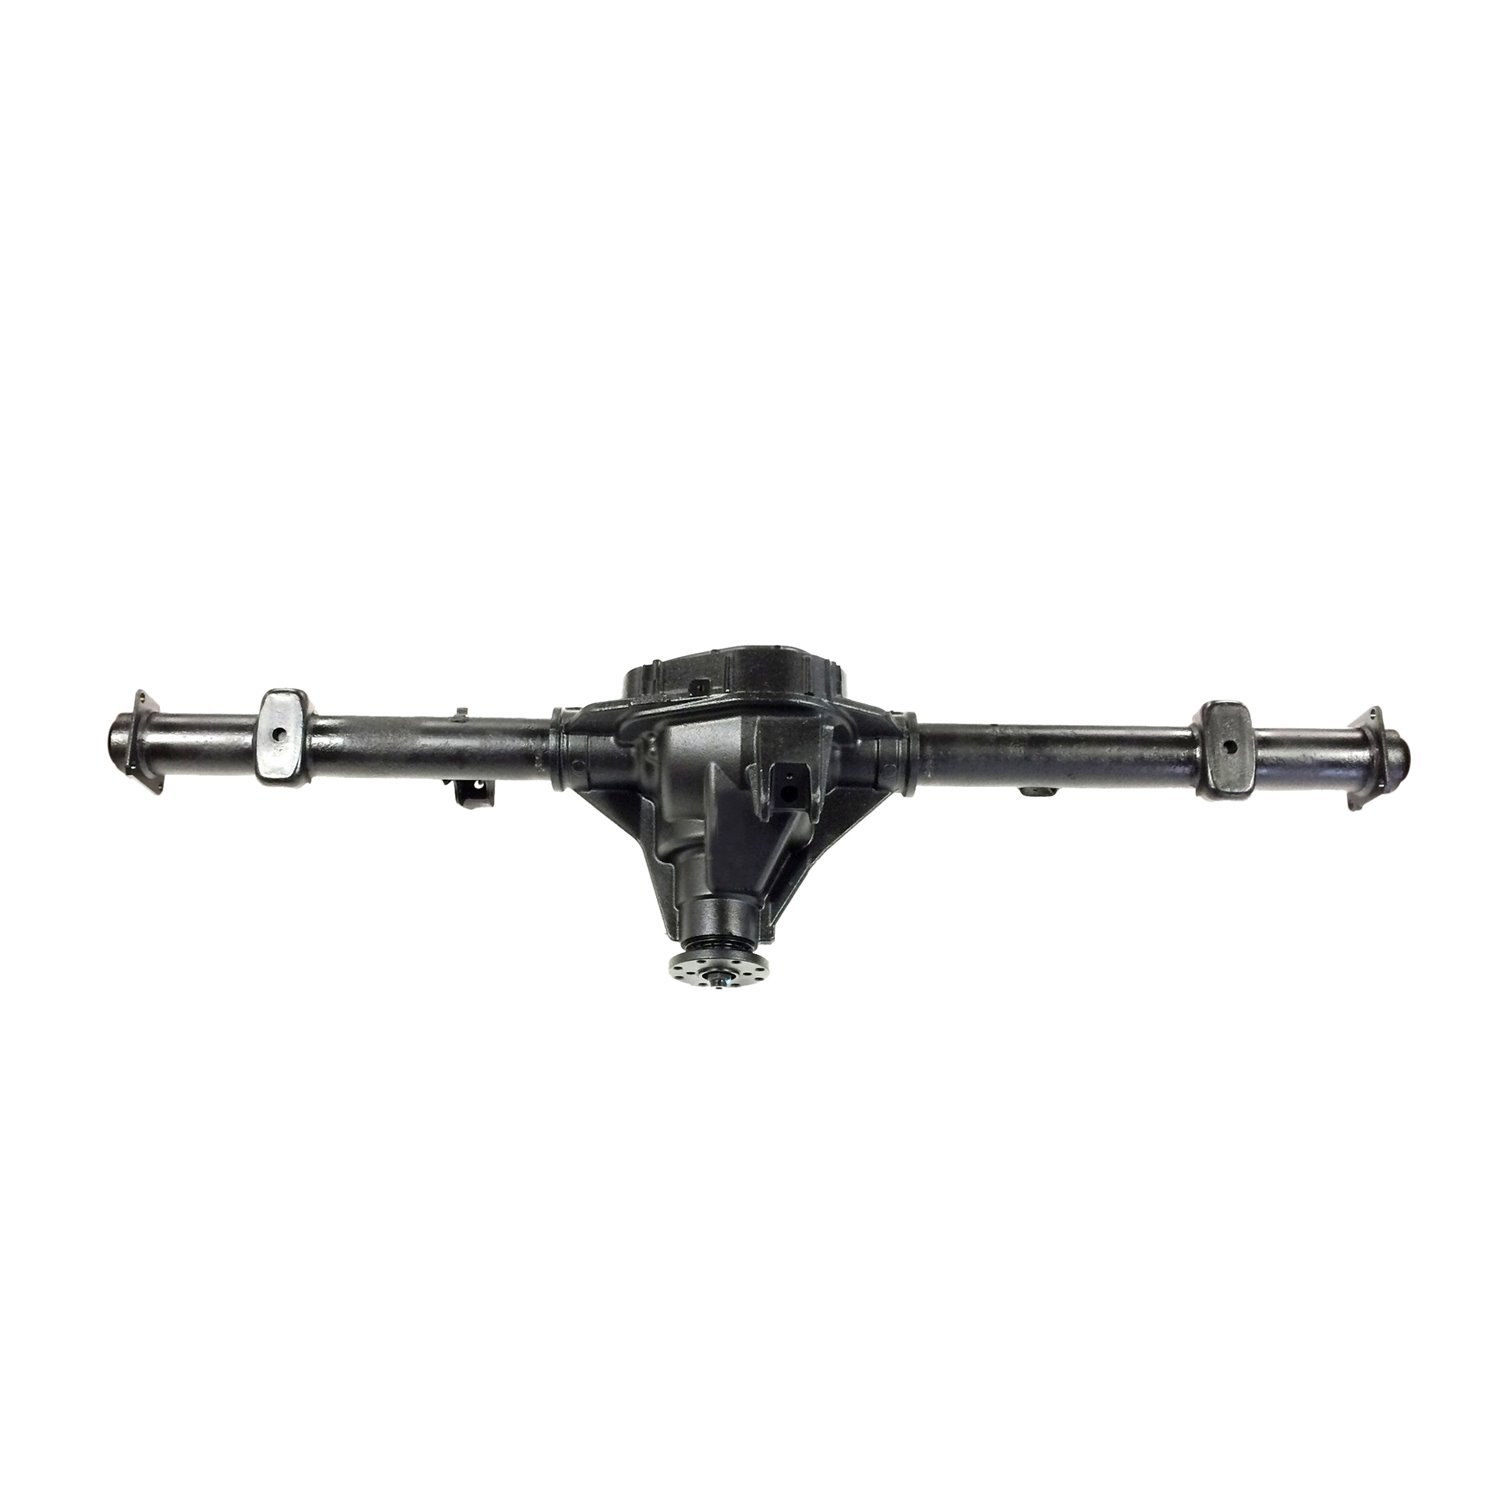 Remanufactured Complete Axle Assembly for Ford 9.75" 12-13 Ford F150 4.11 Ratio, 6 Lug